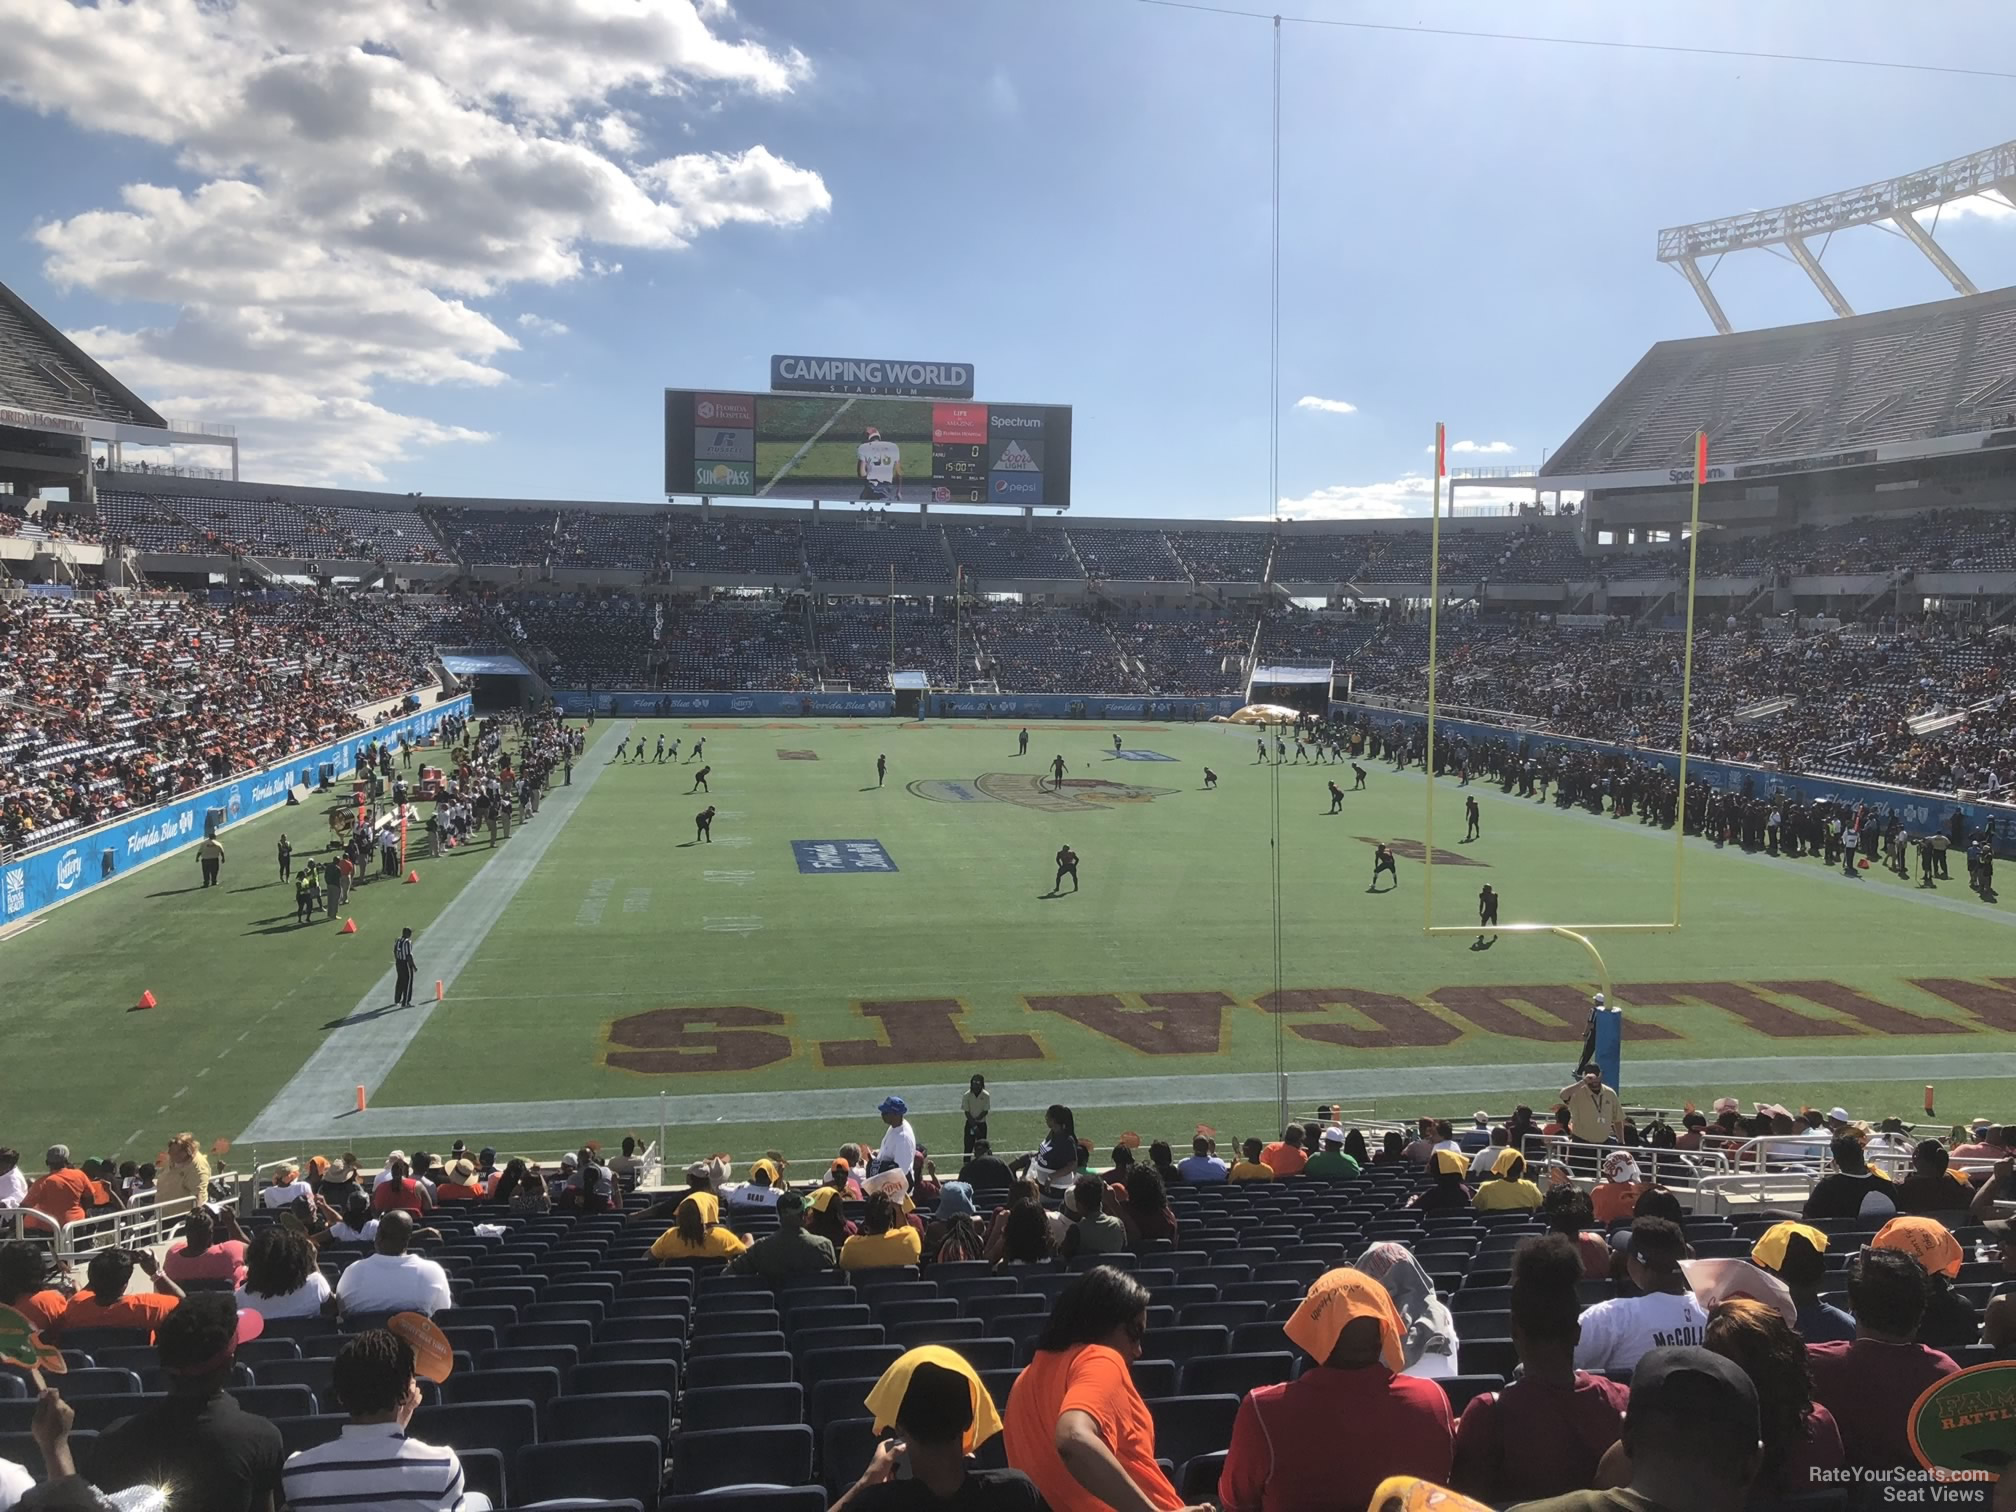 section 148, row ee seat view  for football - camping world stadium